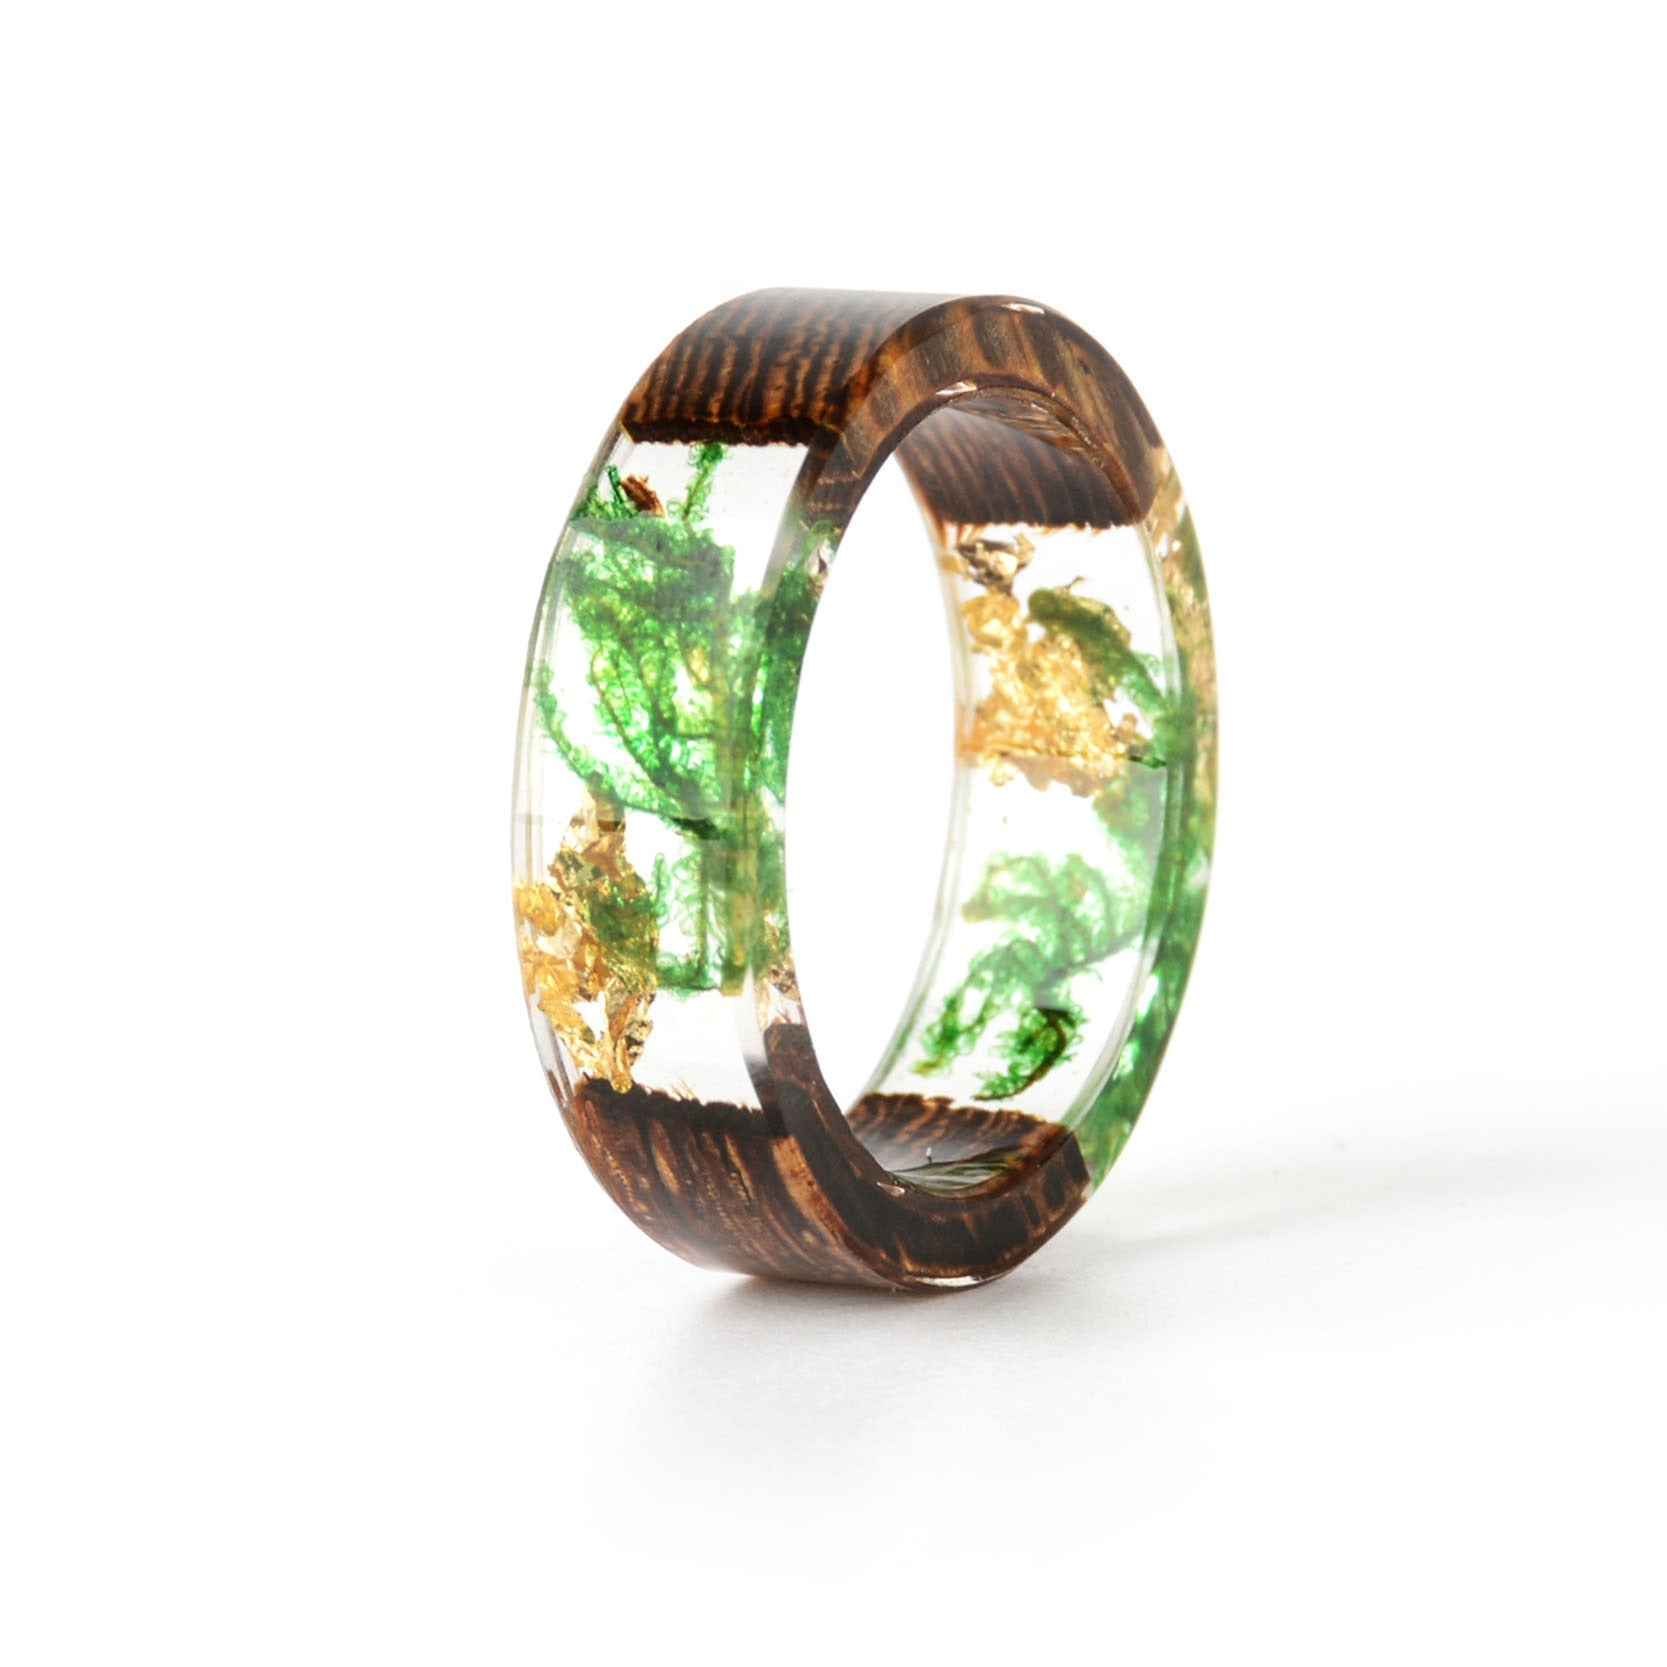 Amazon.com: Mozzin Wood Rings Wooden Band For Men and Women, 8mm Natural  Hardwood Ring, Comfort Fit, Heart Beat Motif Inlaid : Handmade Products